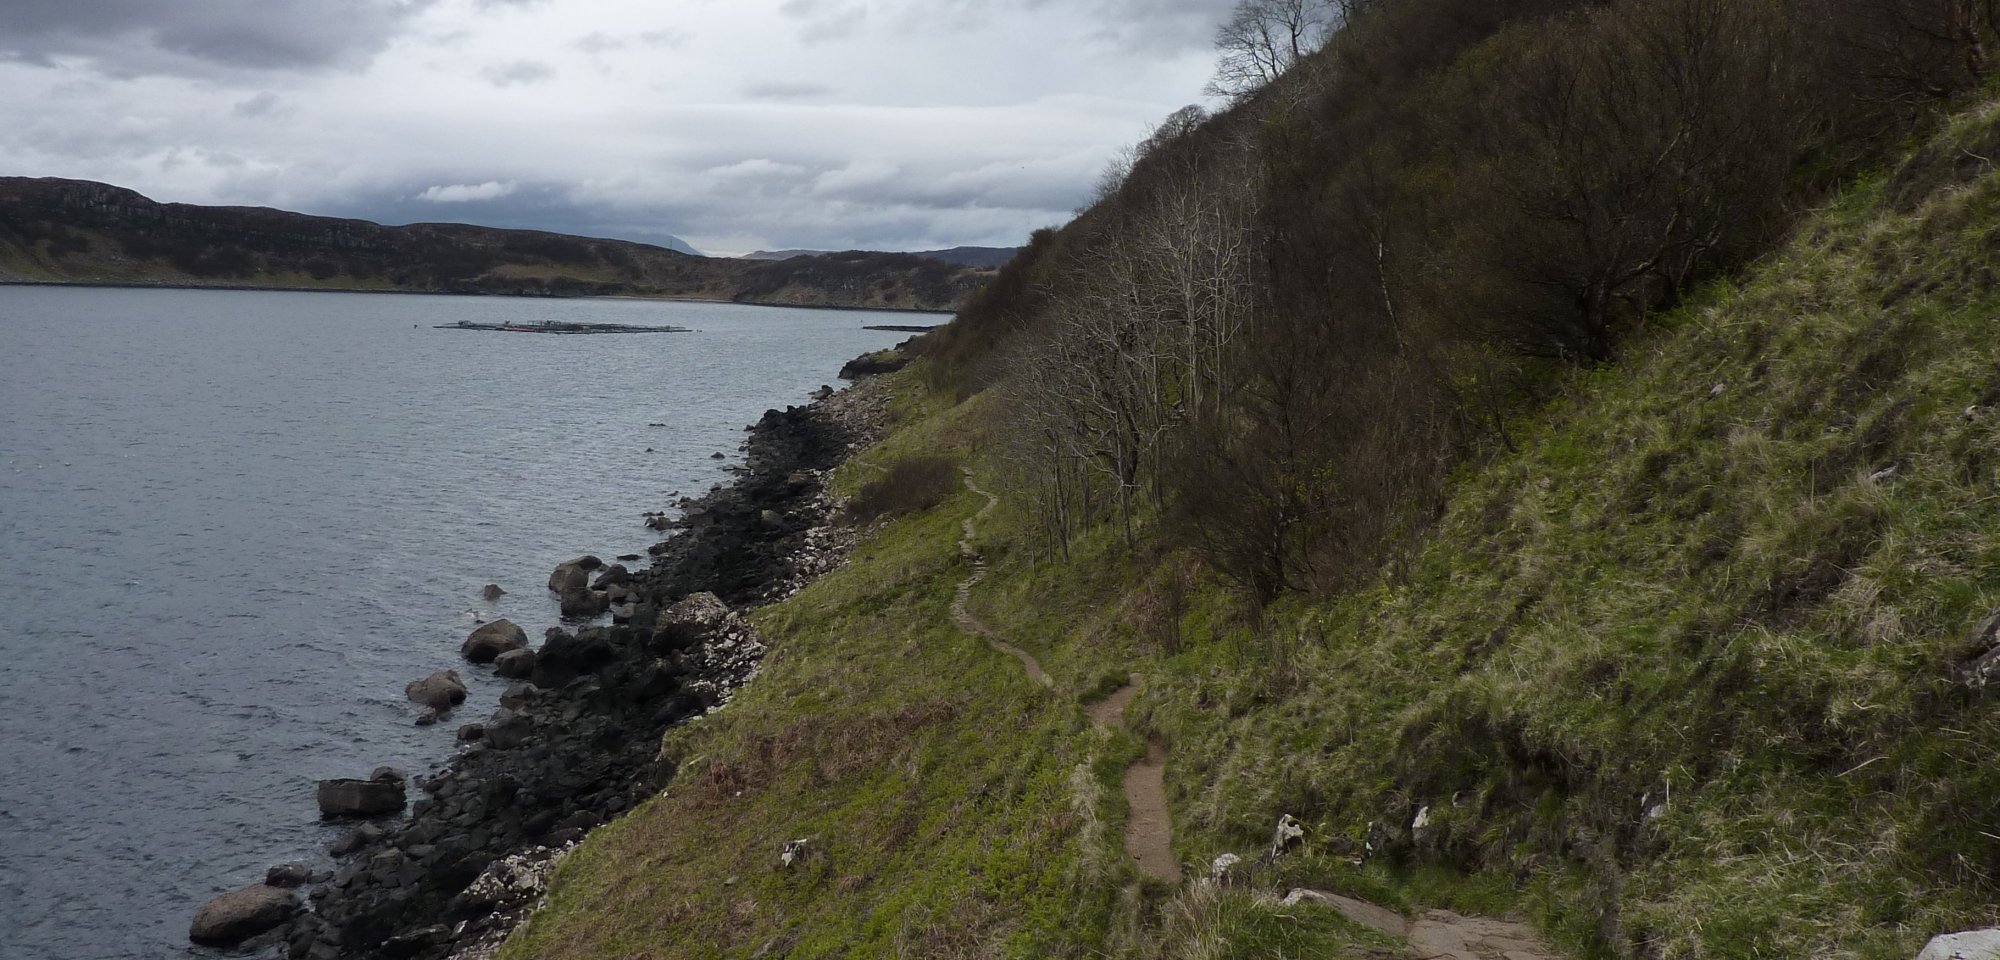 The path into Portree is well-laid and easy to follow